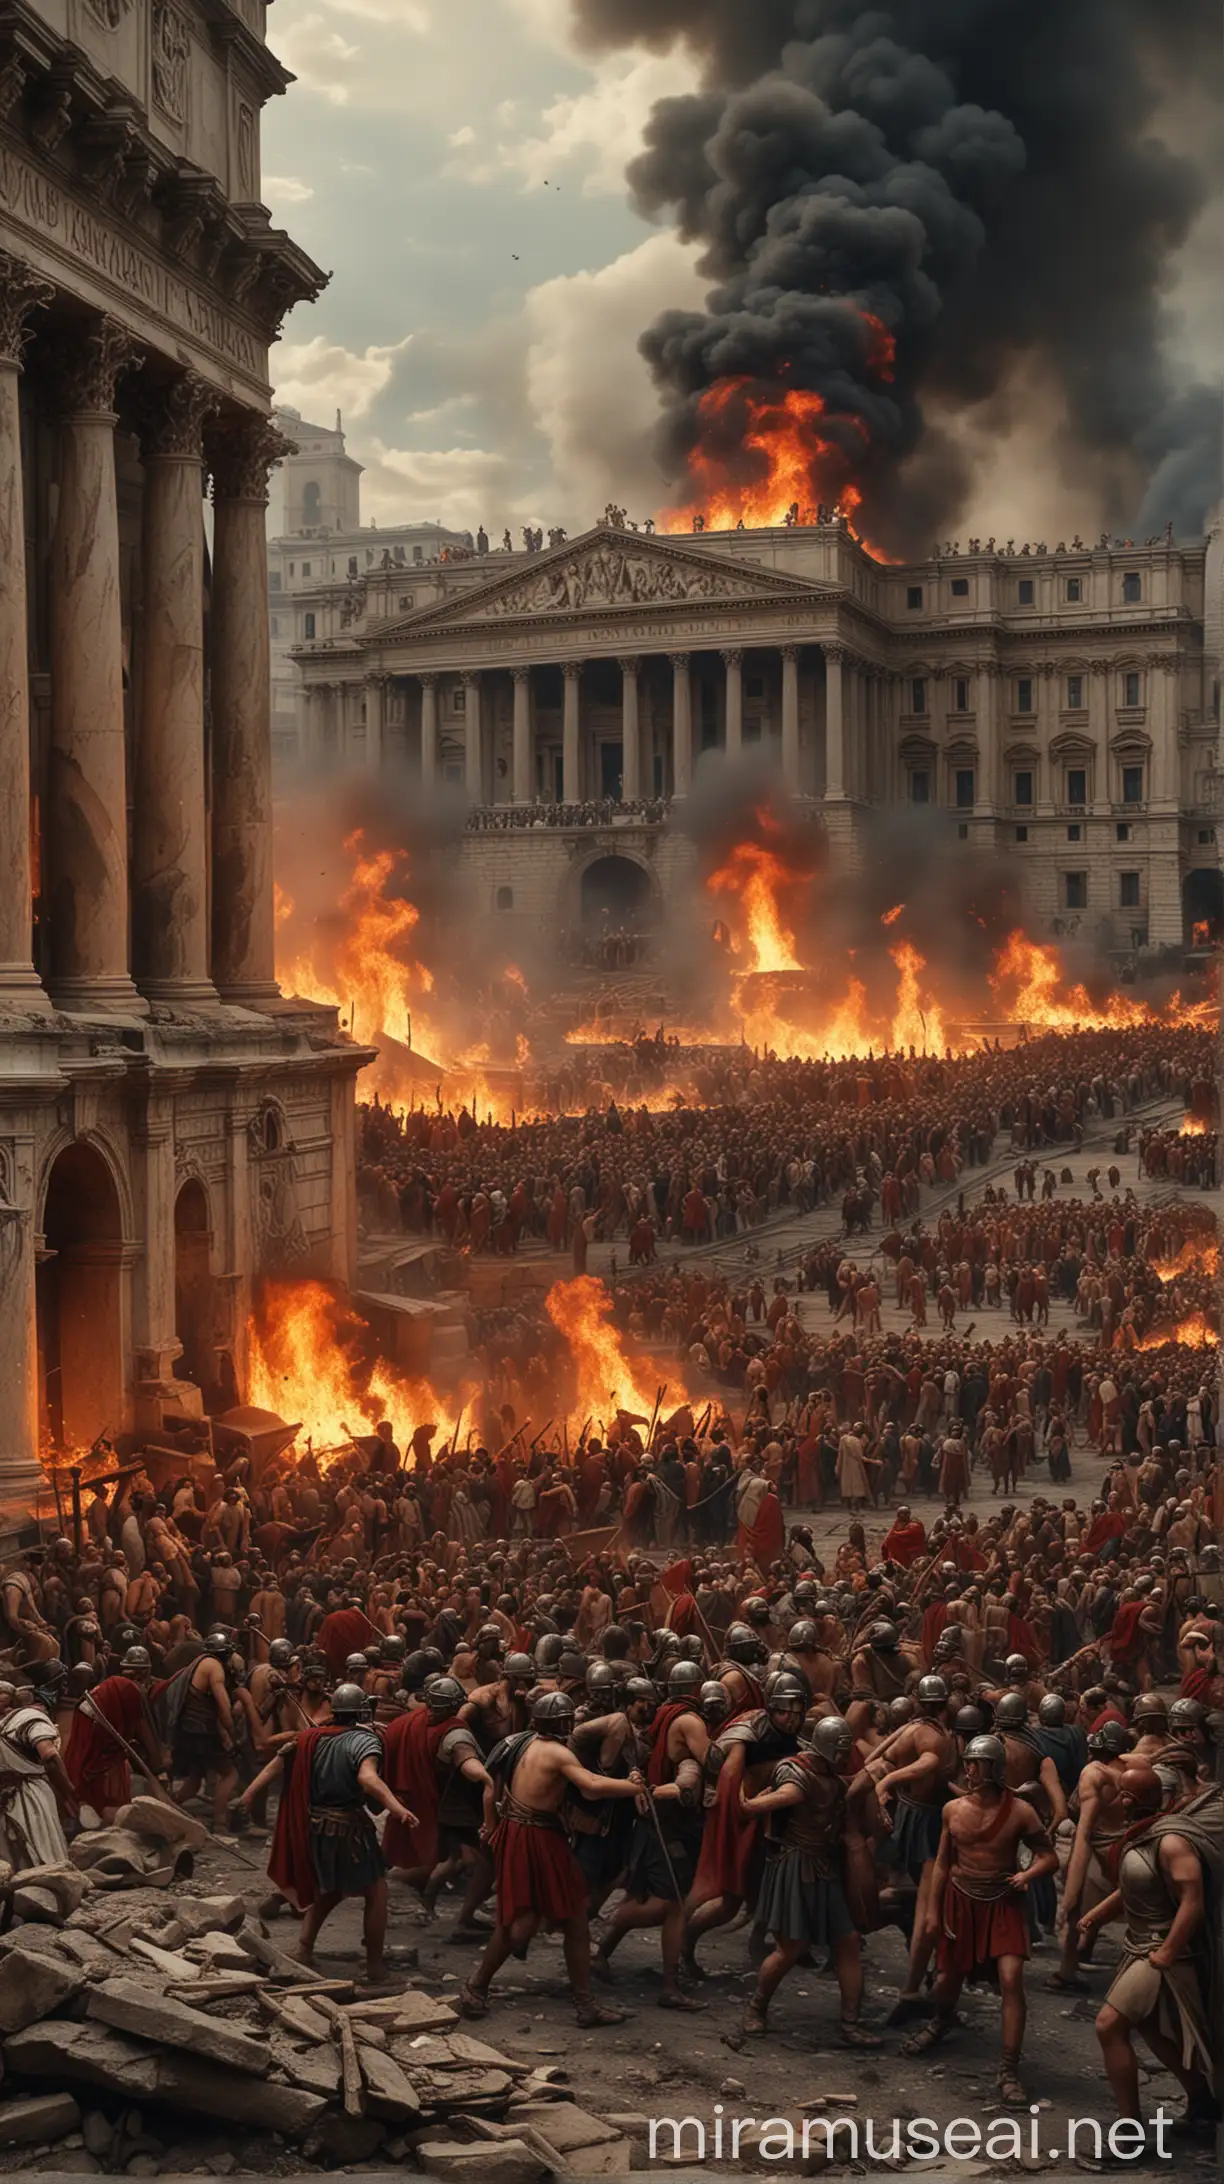 A chaotic scene of Romans fleeing the fire, with the majestic palace in the background, representing Nero's ambition. hyper realistic